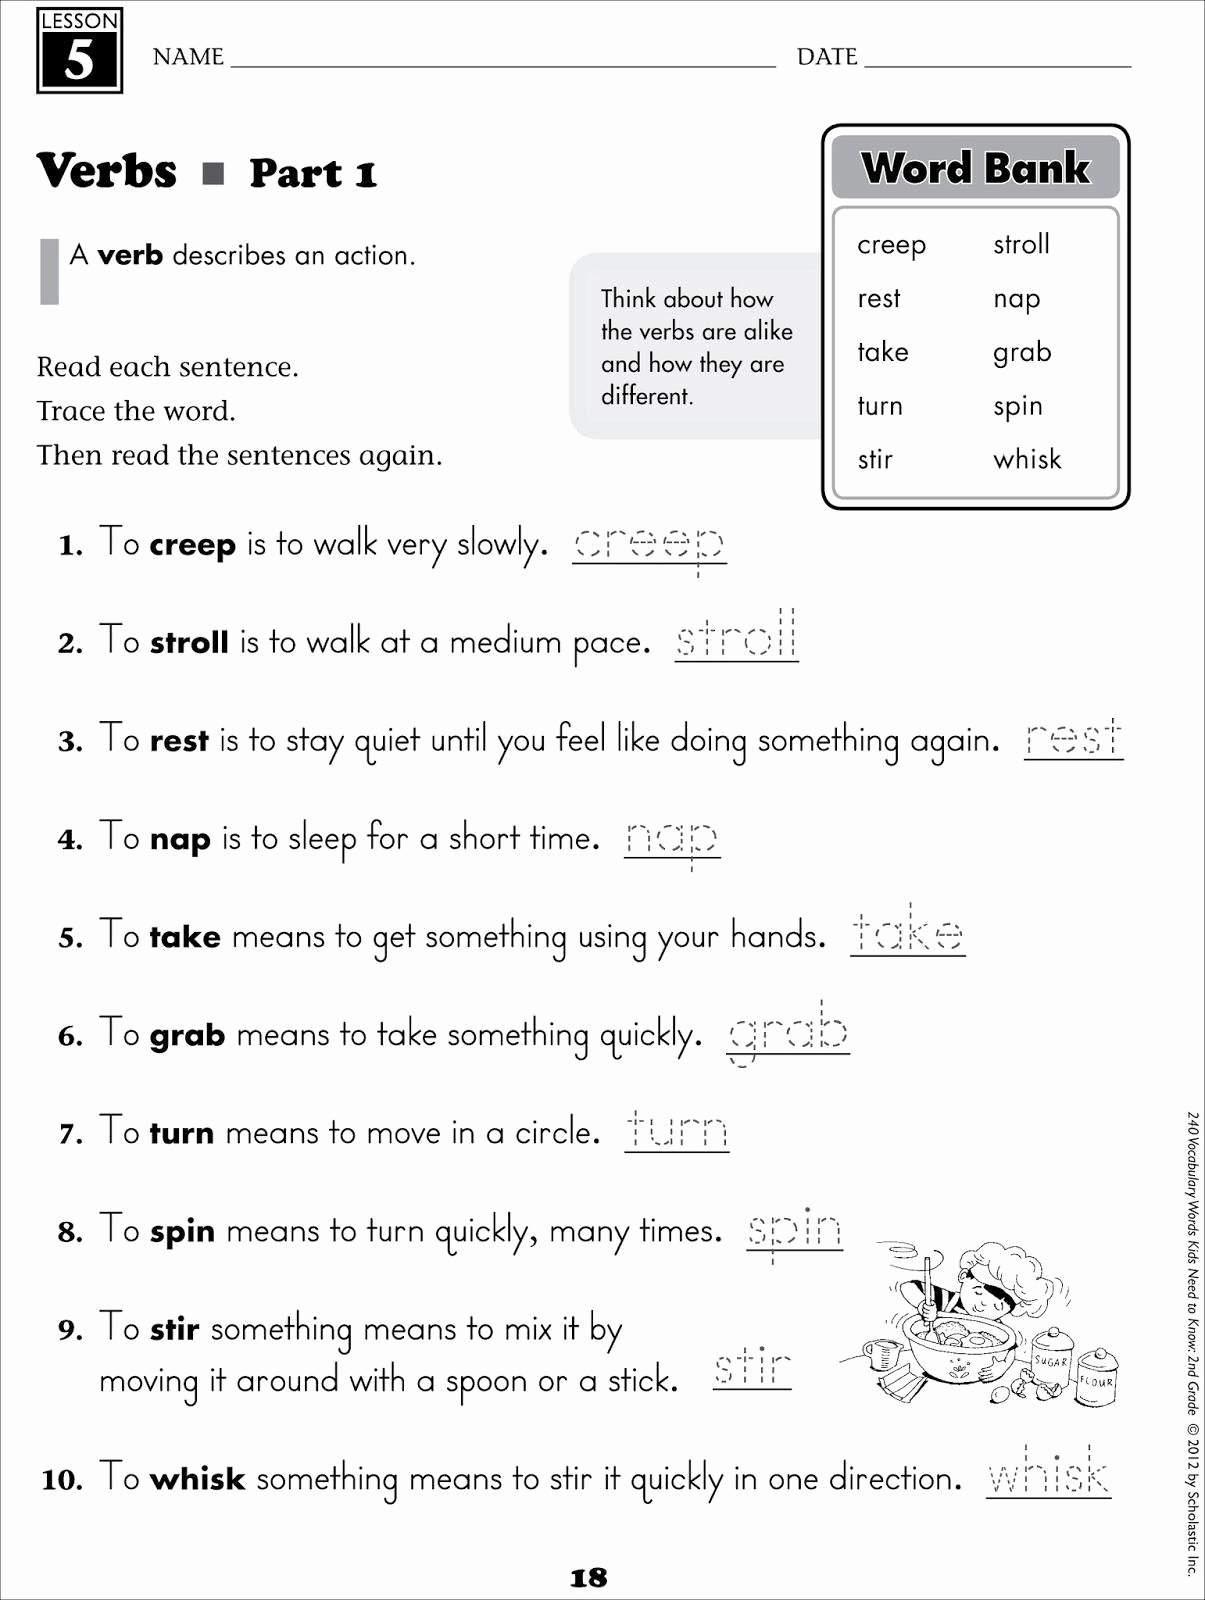 verb-to-be-worksheets-for-adults-pdf-db-excel